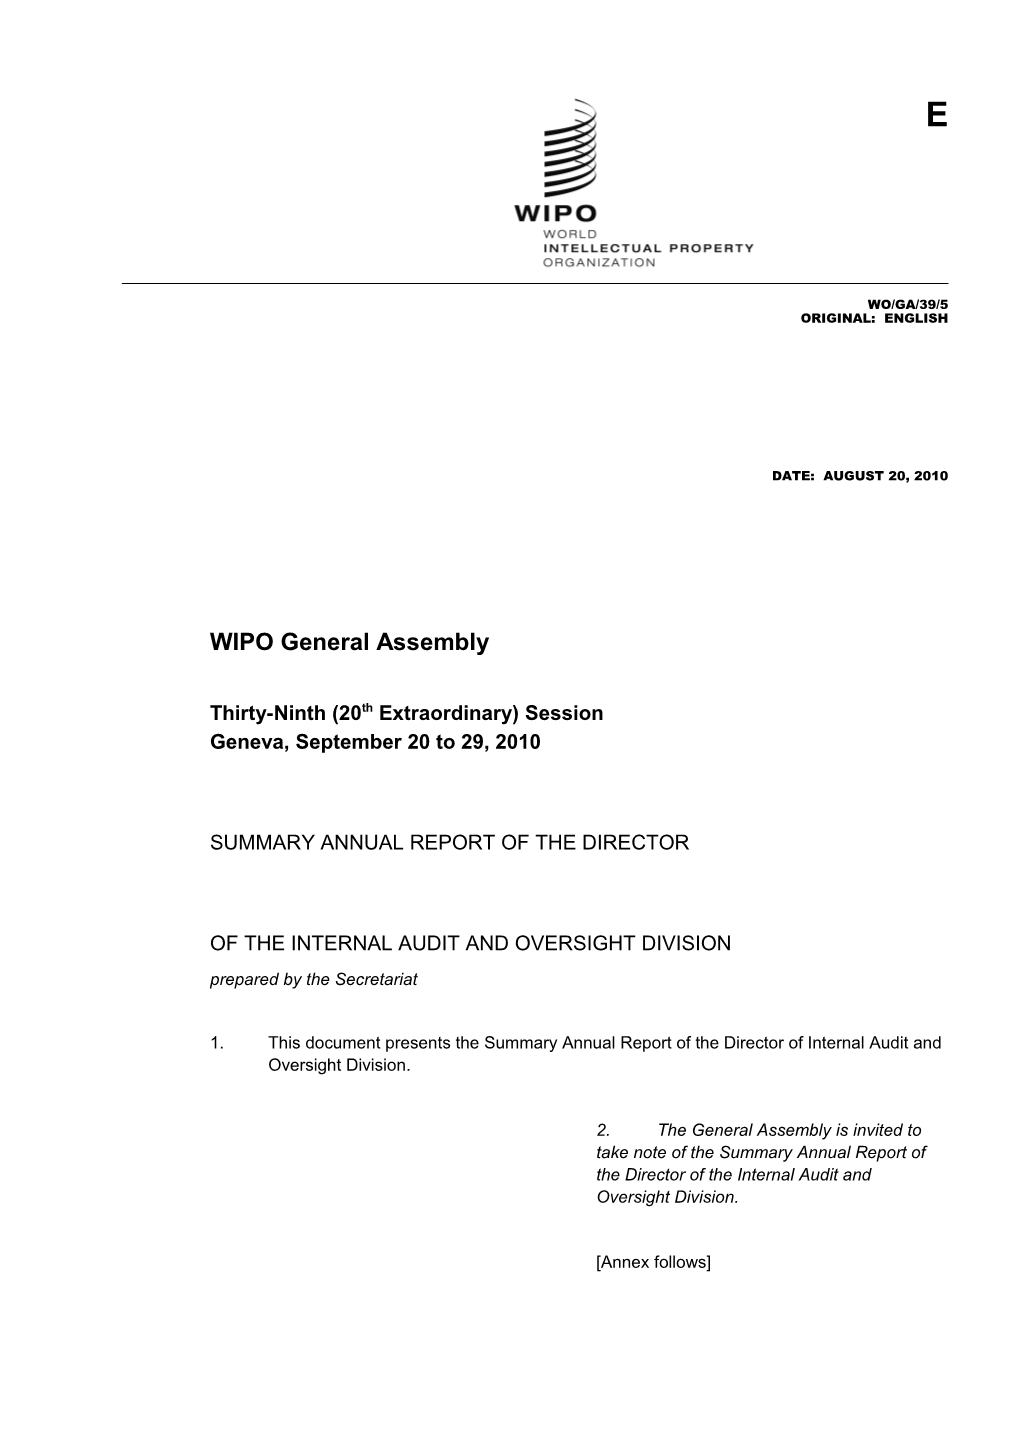 Summary Annual Report of the Director